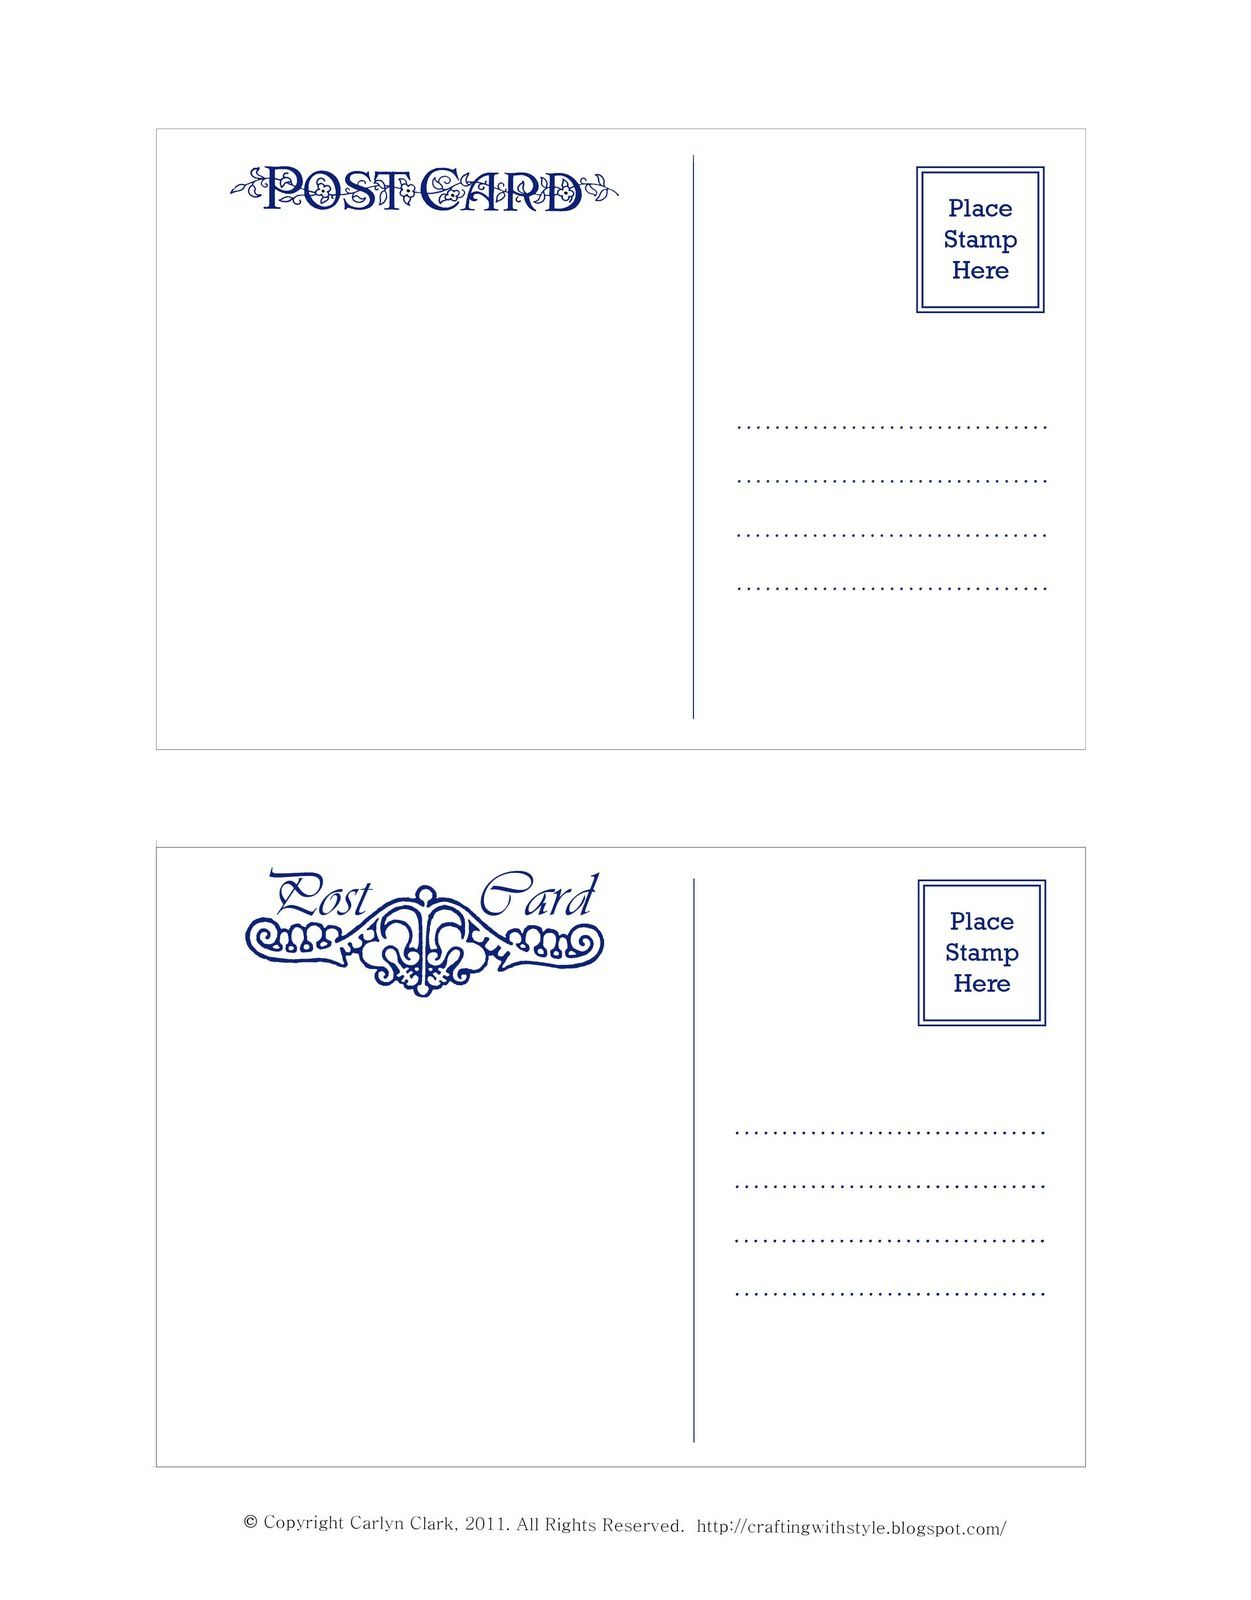 Crafting With Style: Free Postcard Templates | Postcards For Post Cards Template